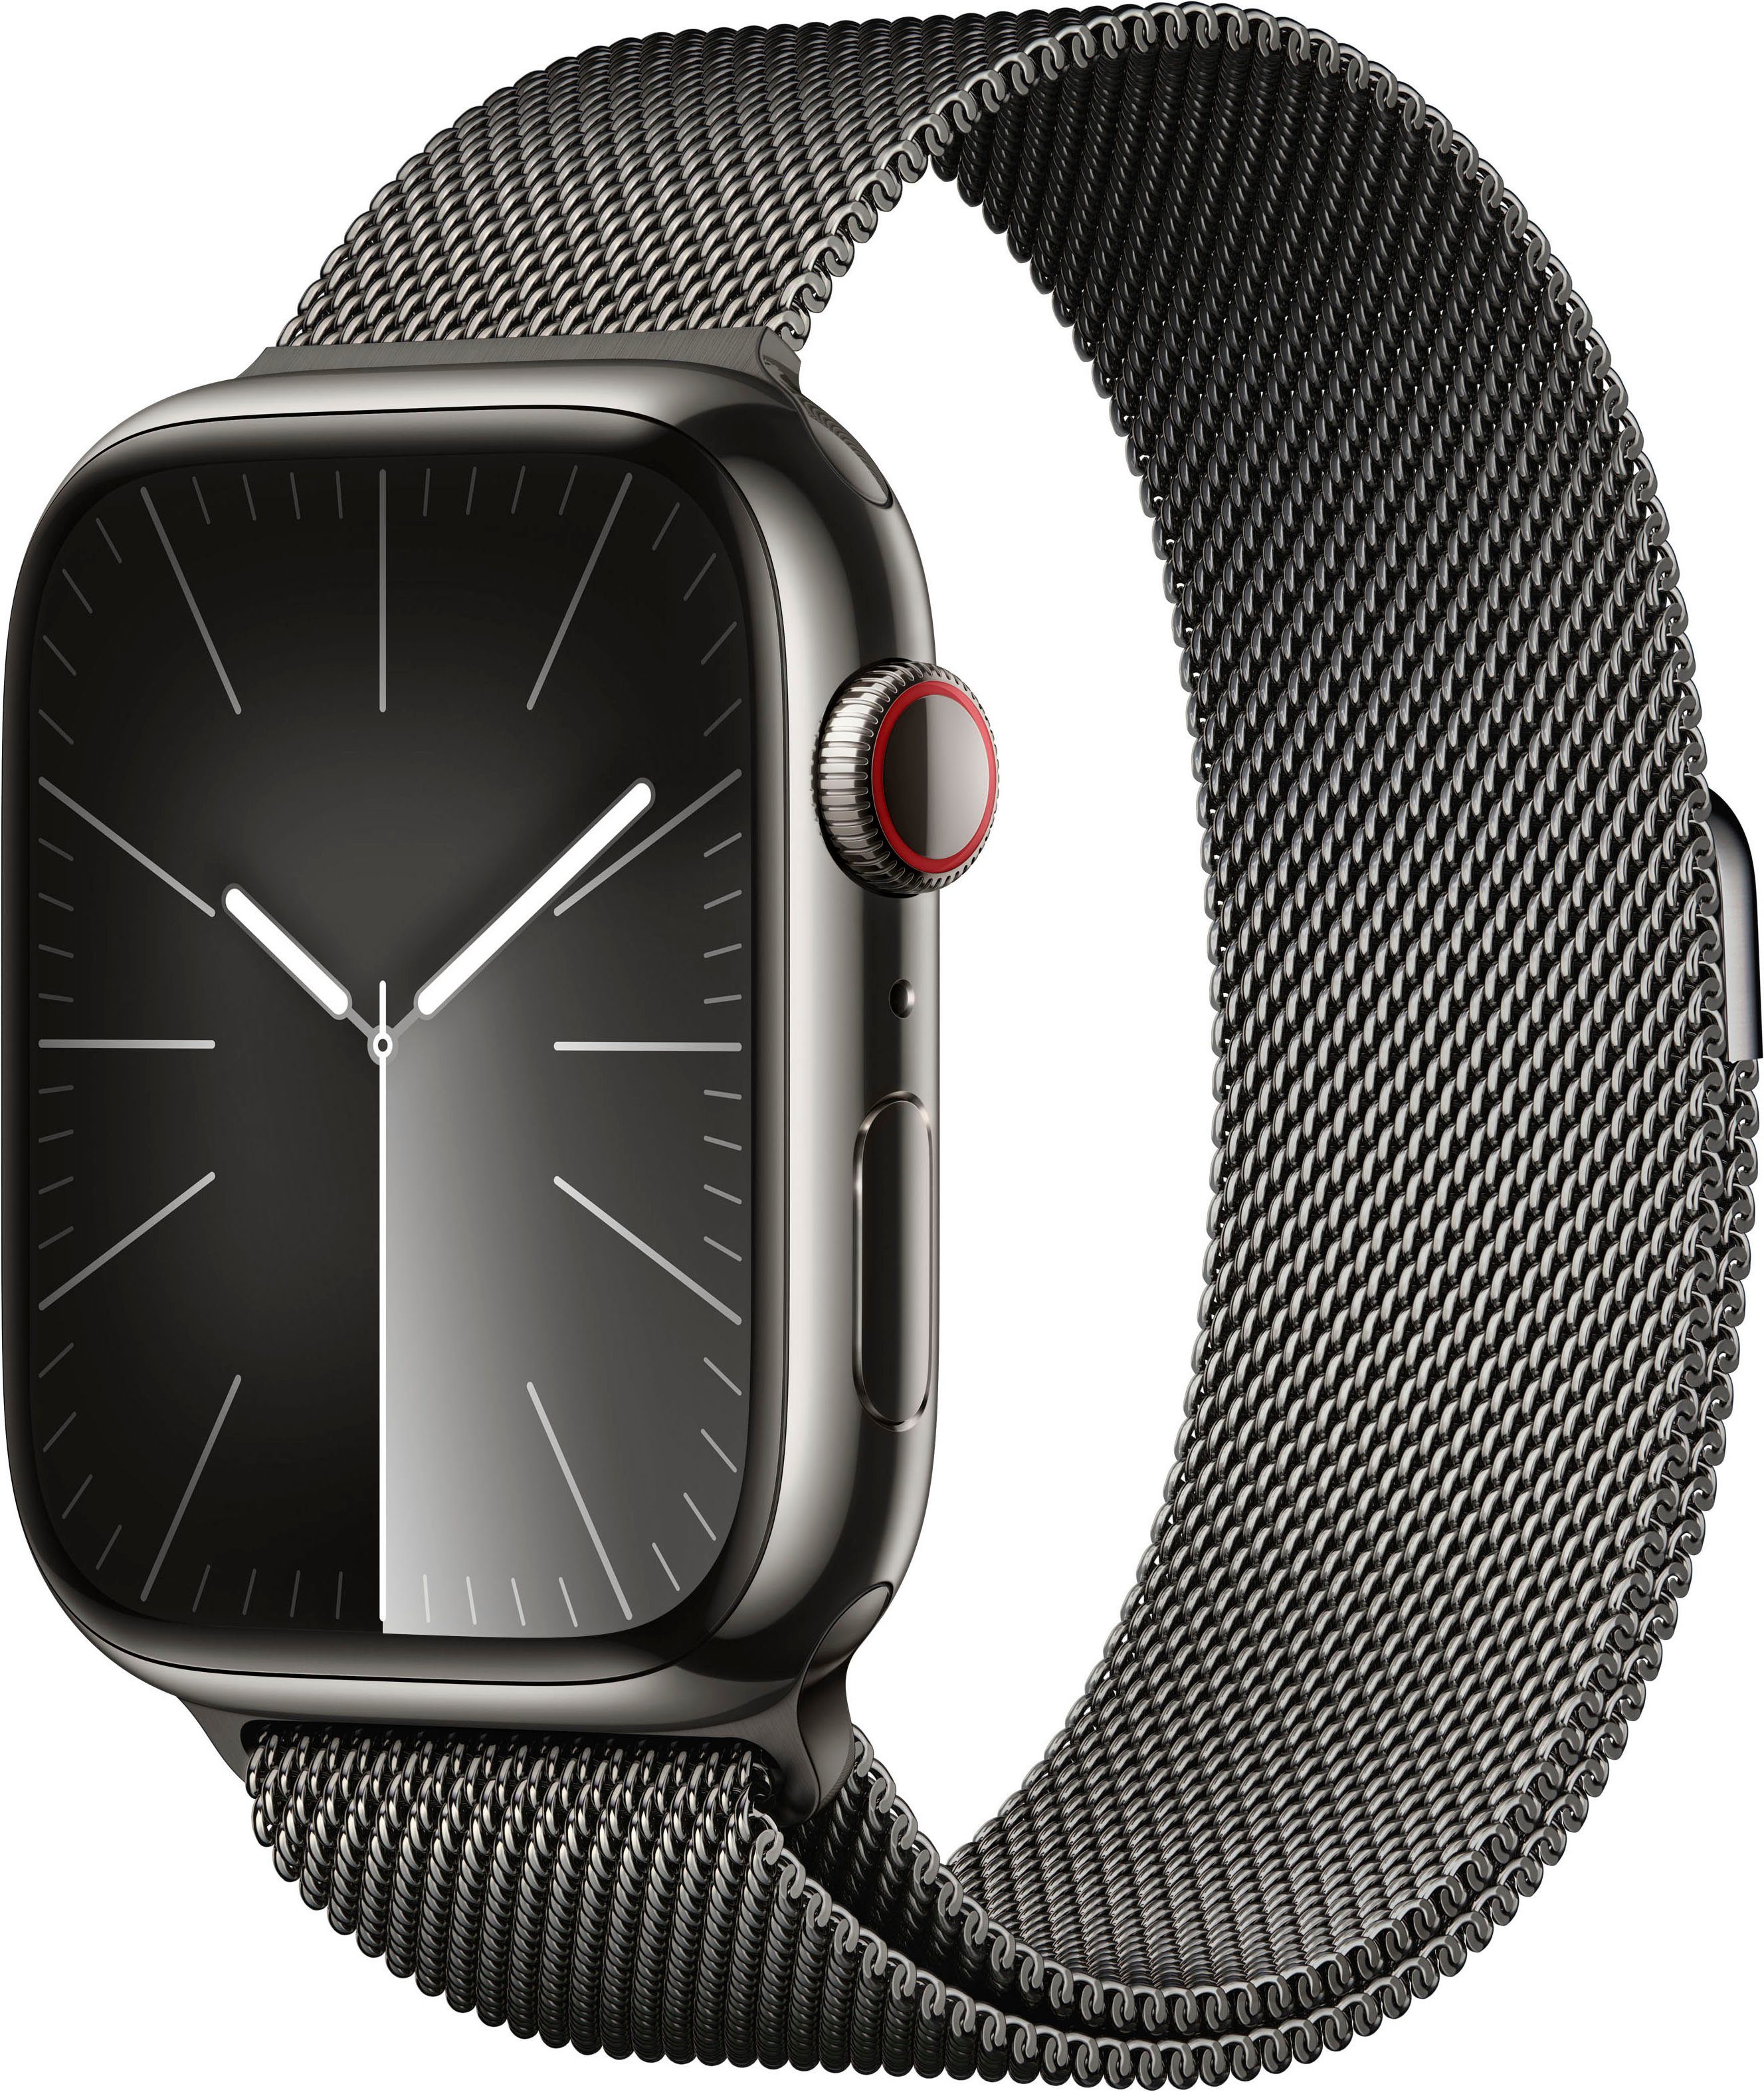 Apple Watch Series 9 GPS + Cellular Stainless Steel 45mm Smartwatch (4,5 cm/1,77 Zoll, Watch OS 10), Milanese Loop graphite | graphite